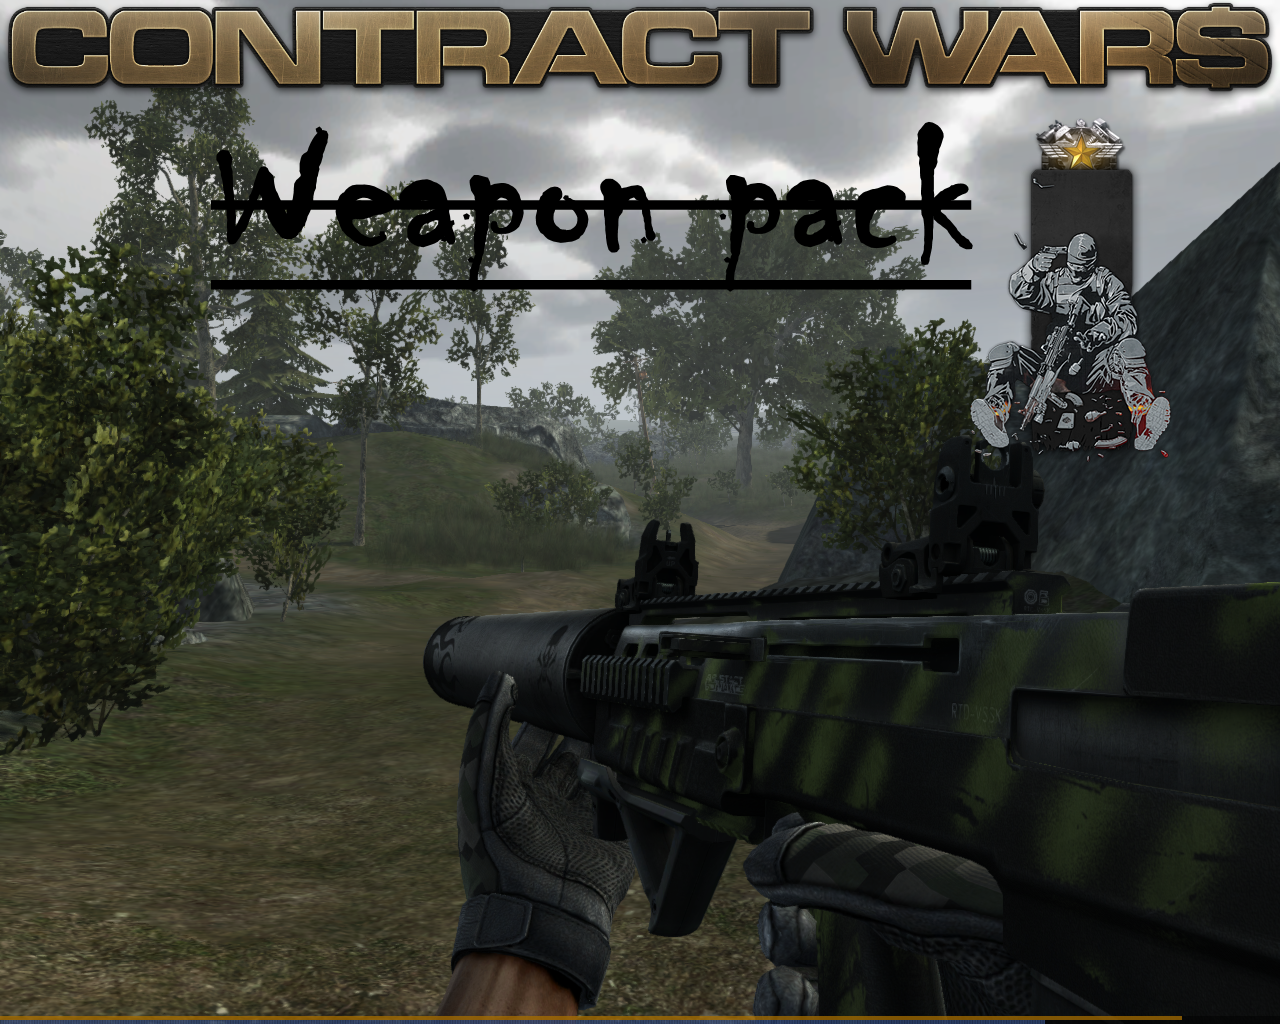 Contract Wars AS Val addon - Counter-Strike - ModDB